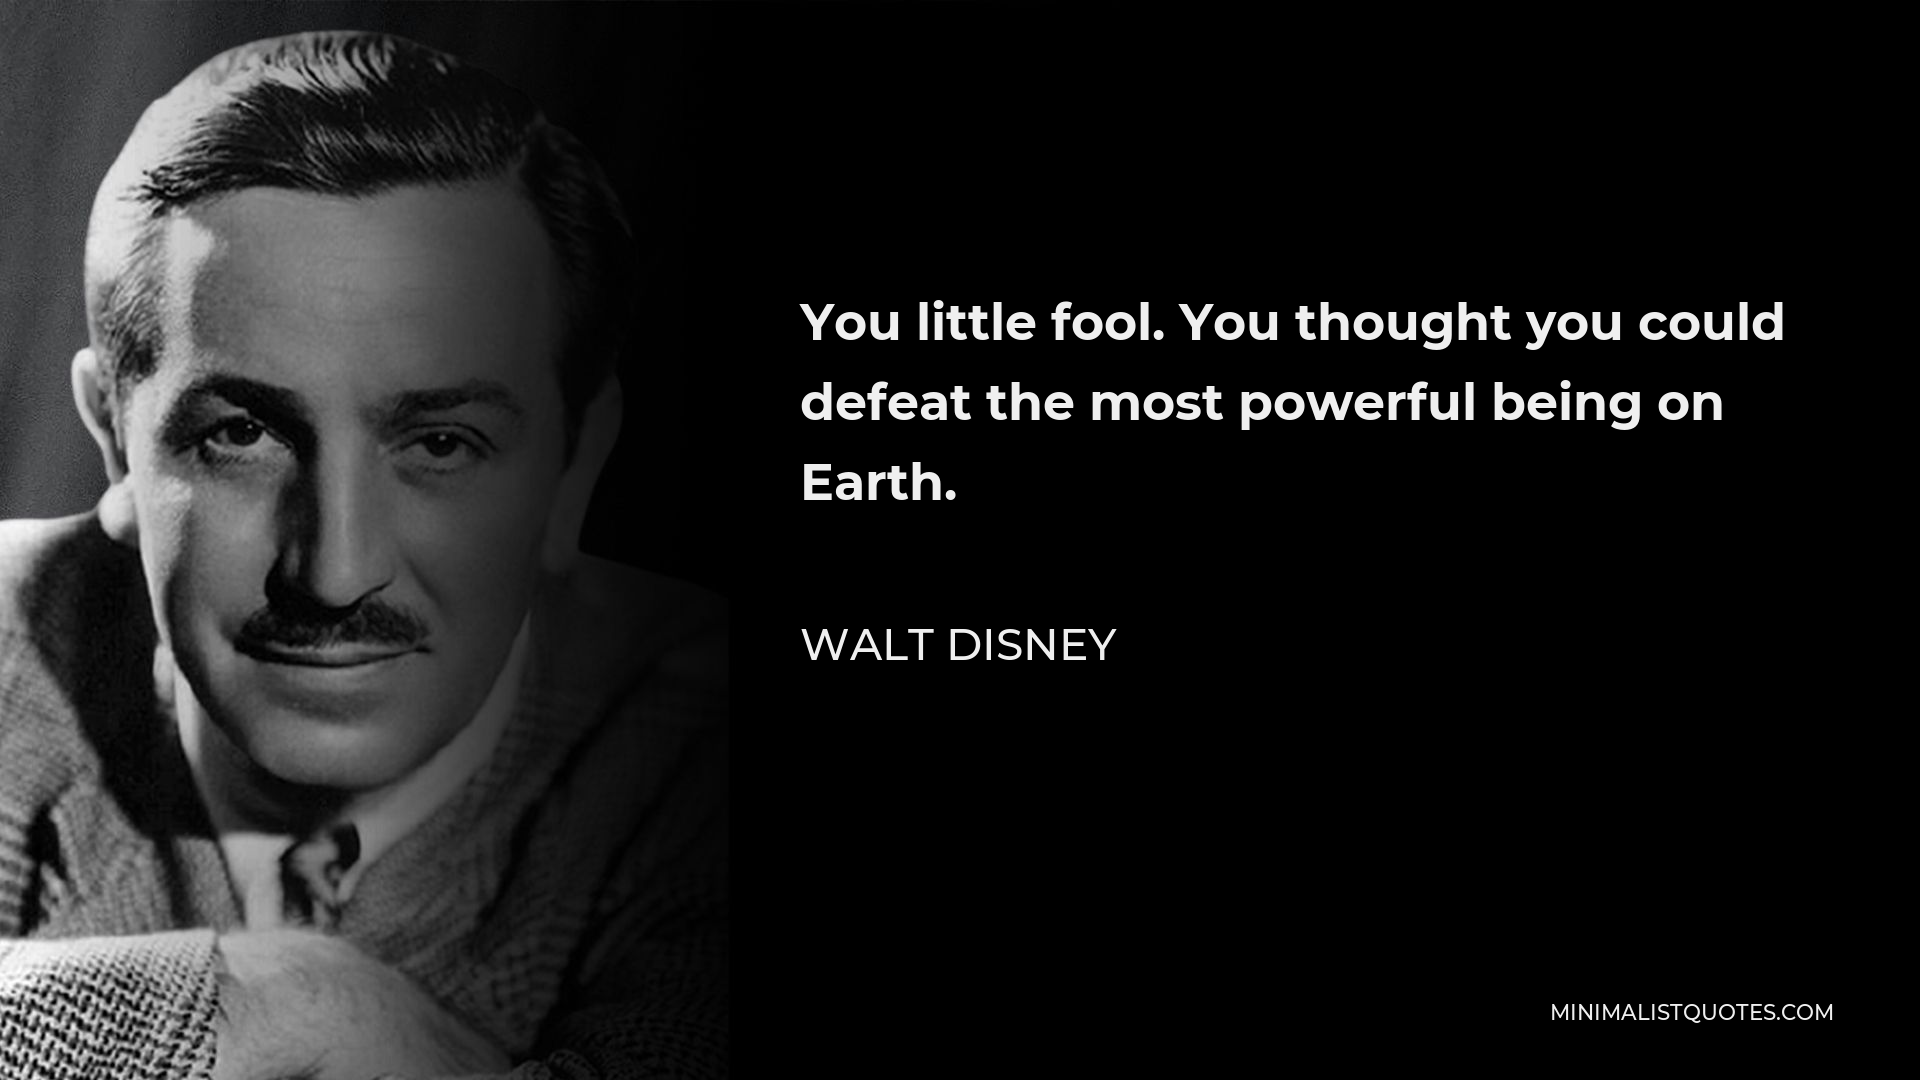 Walt Disney Quote - You little fool. You thought you could defeat the most powerful being on Earth.